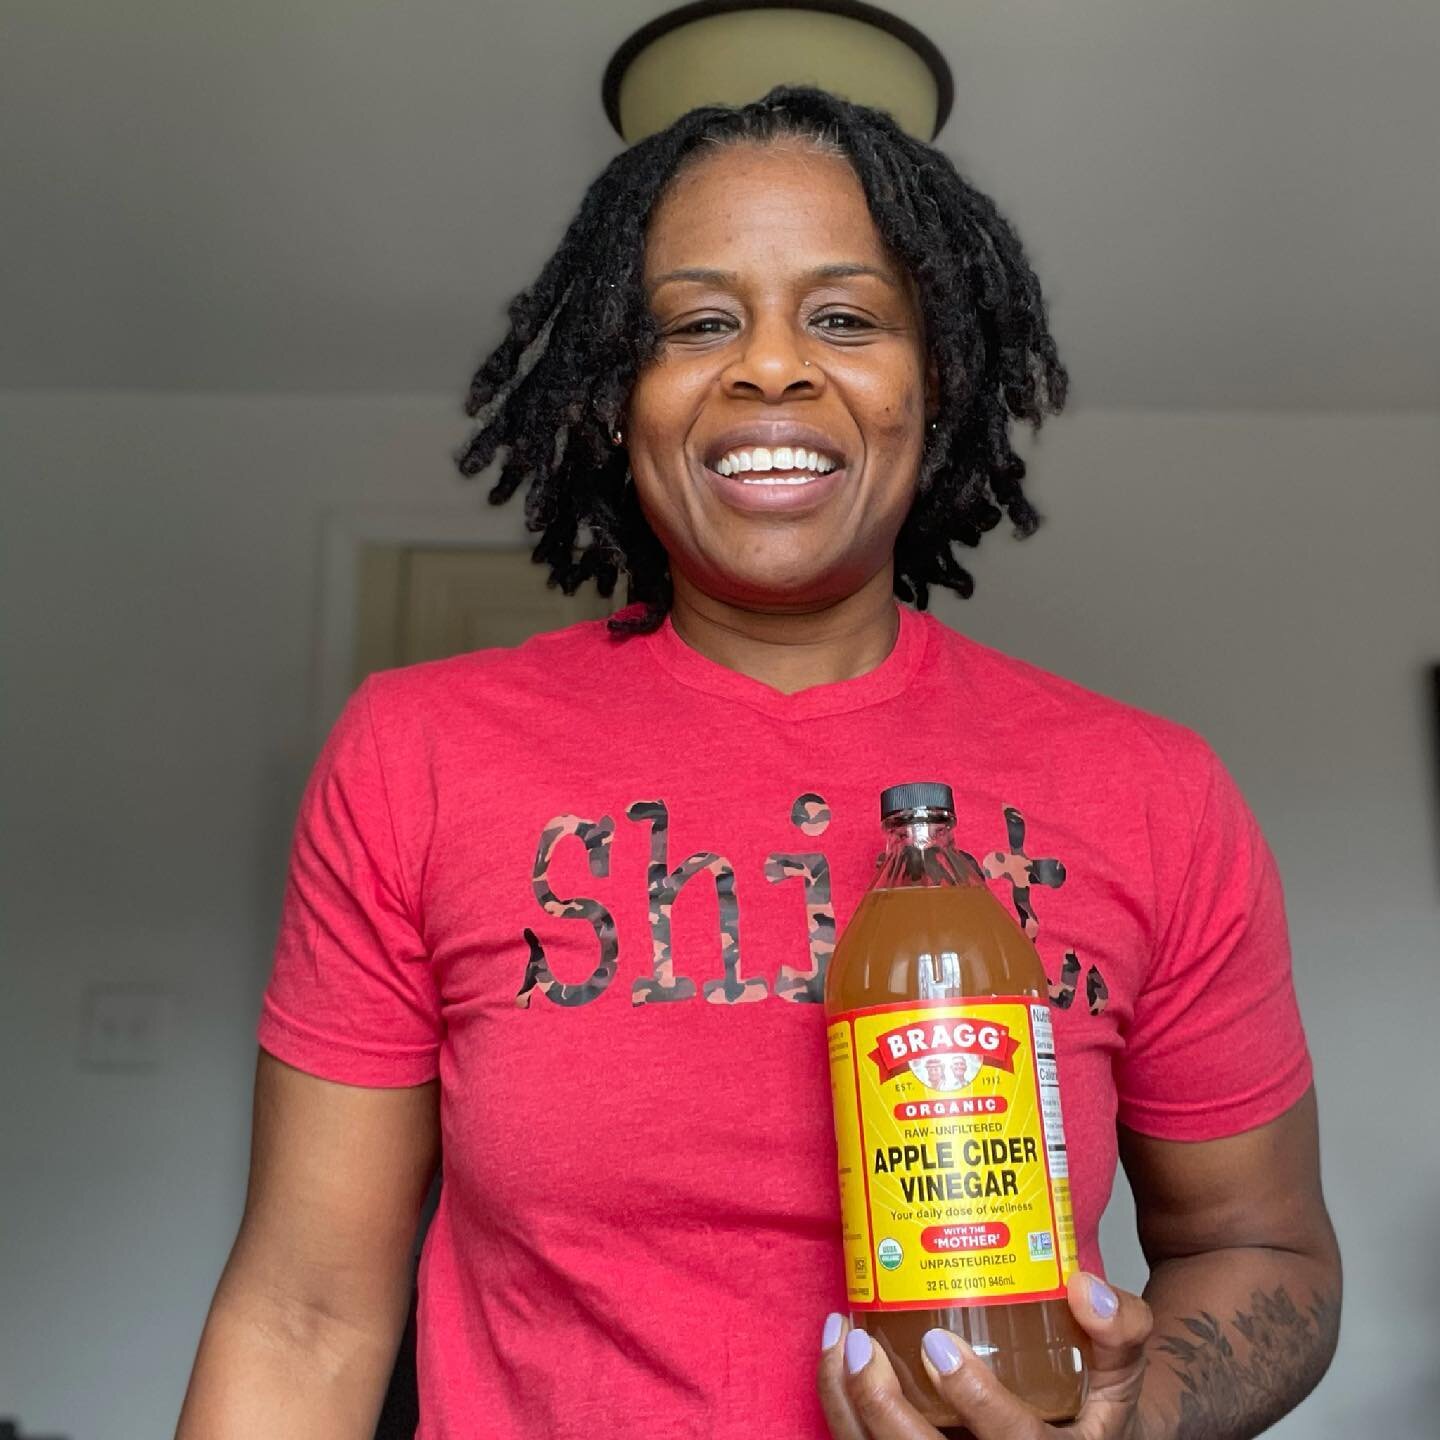 Yep! ACV changed my life. I suffered from bloating, constipation and cramping that at one point had me in the ER. Not until I tackled the root issue in my gut (physically and emotionally). ACV stabilized the acid in my gut while I continually tackle 